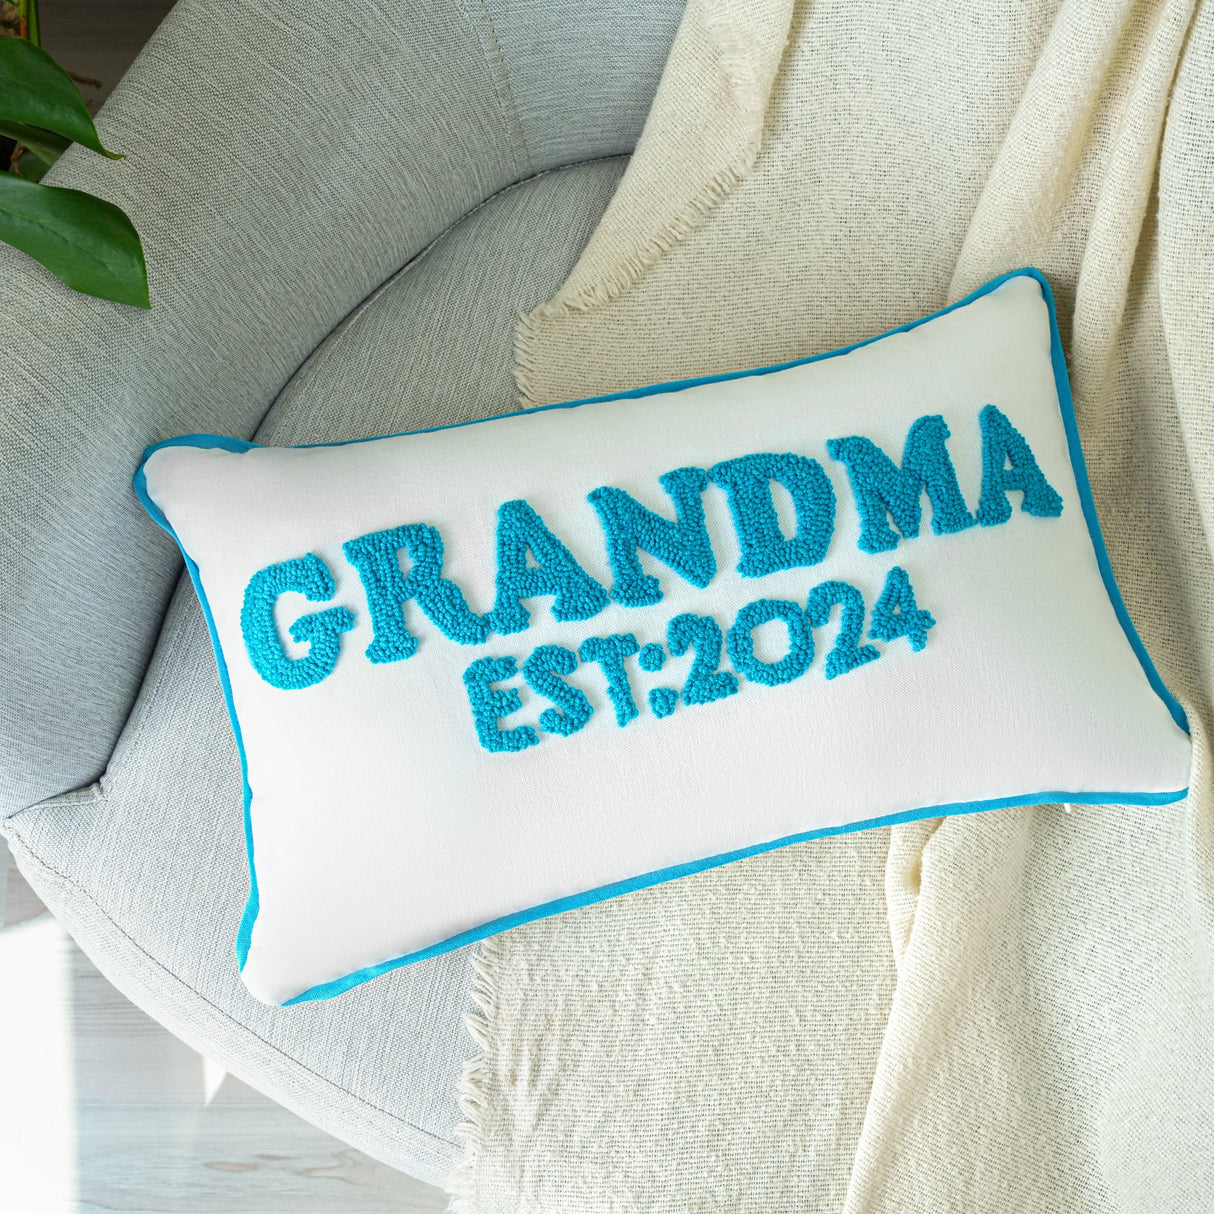 a blue and white pillow that says grandma est 2012